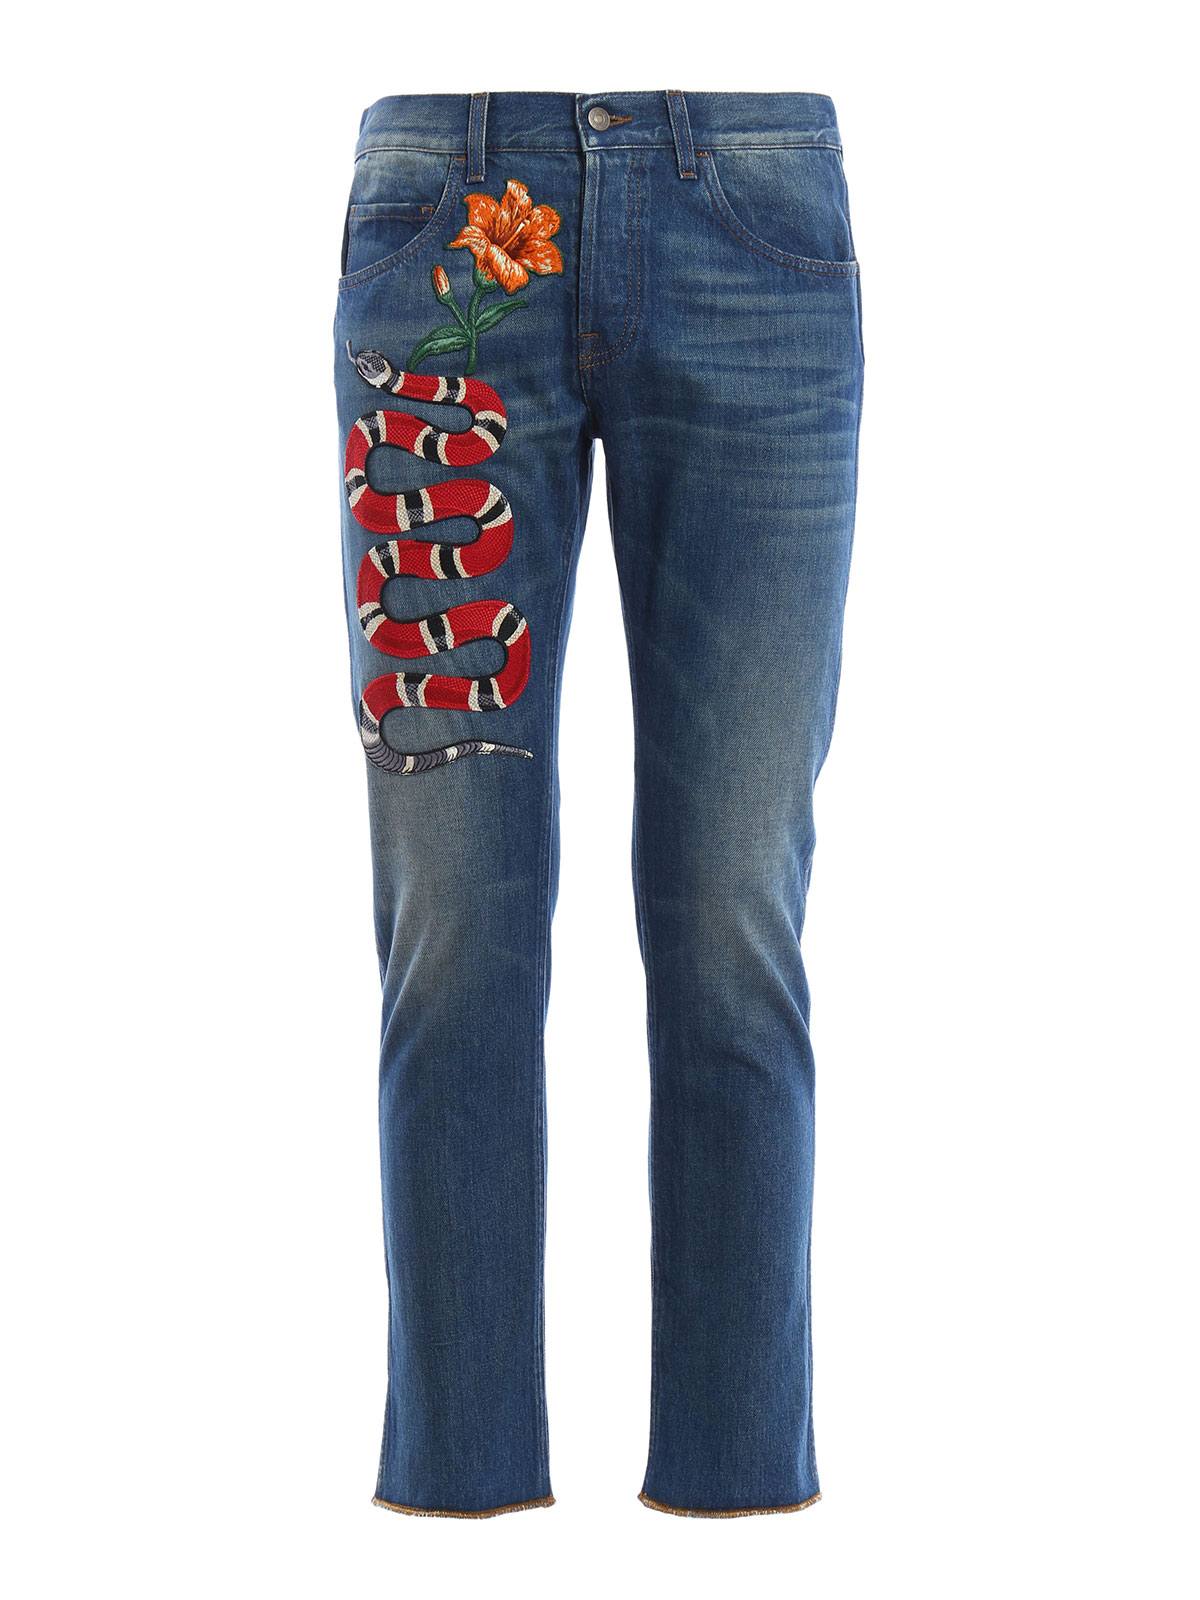 Straight leg jeans Gucci - Slim fit embroidered jeans - 430356XR1904571